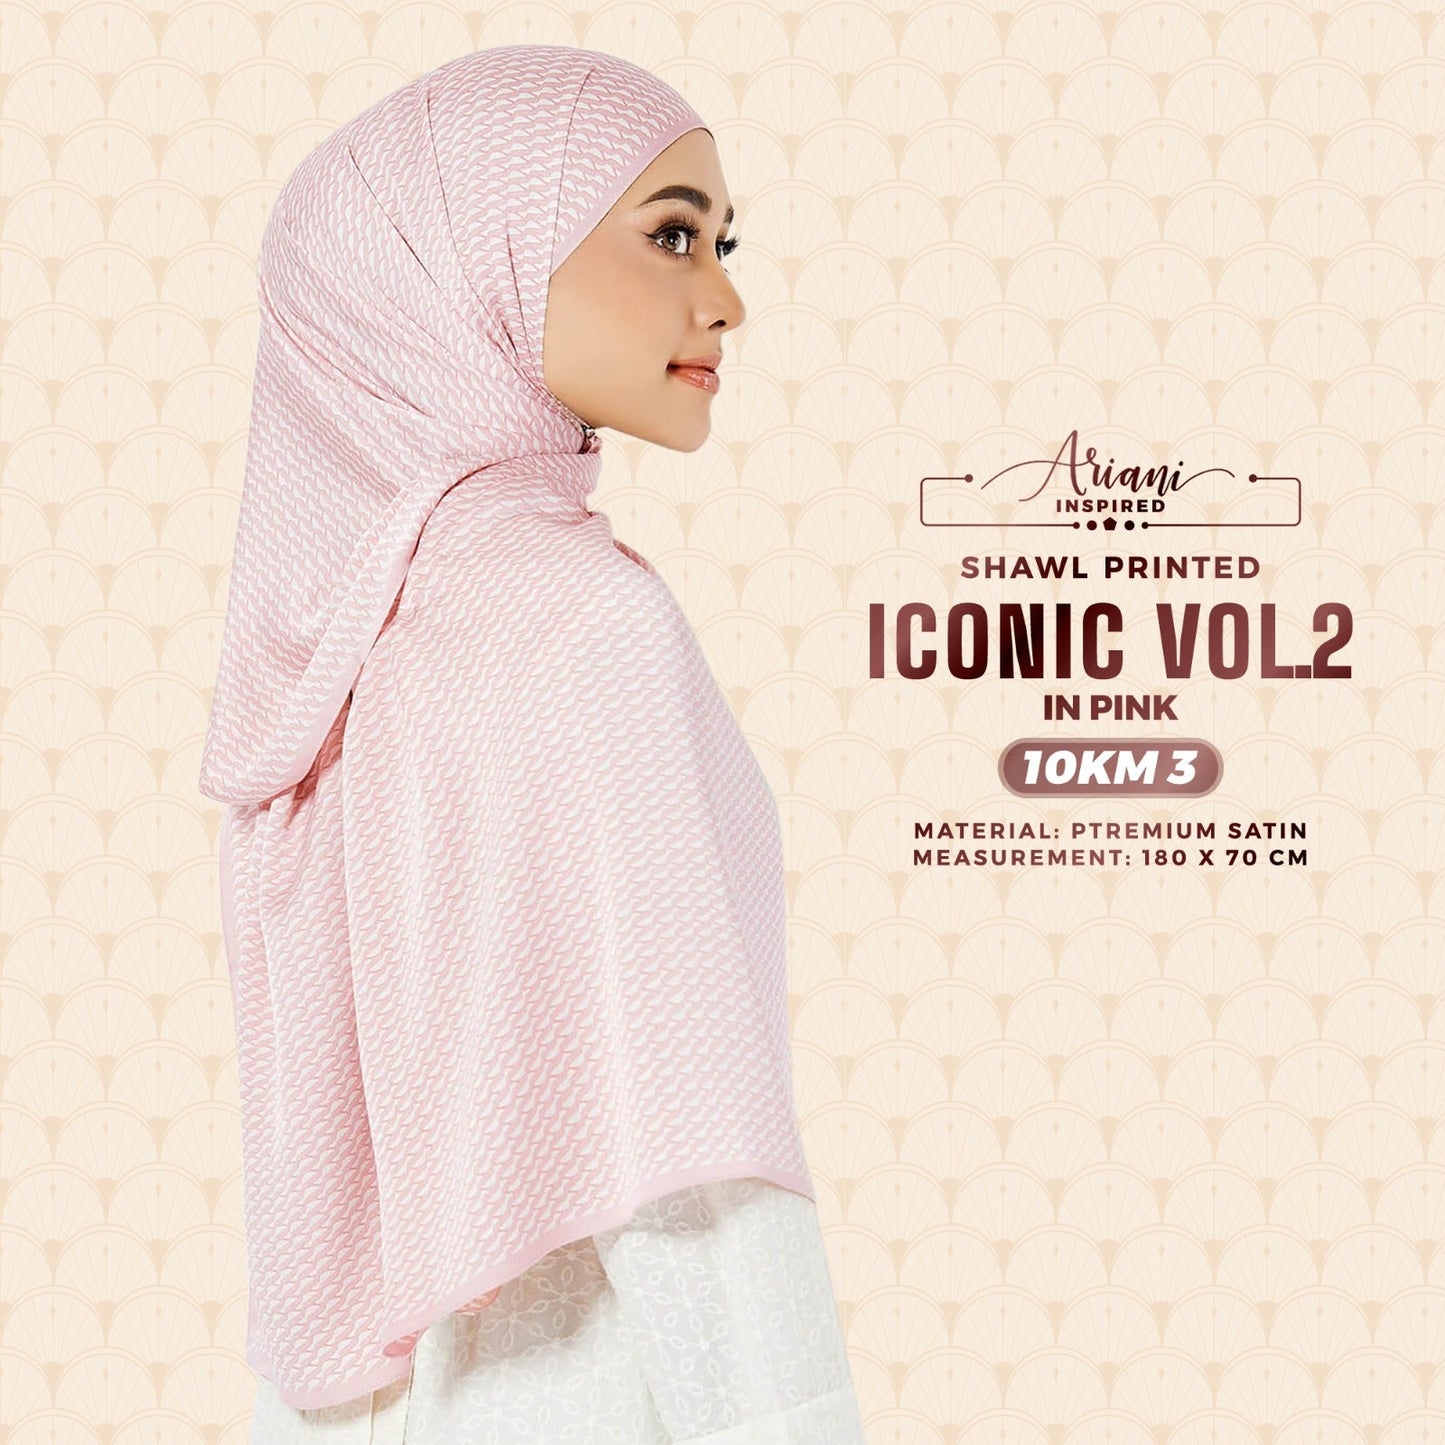 Ariani Inspired Iconic VOL.2 Printed Shawl Collection